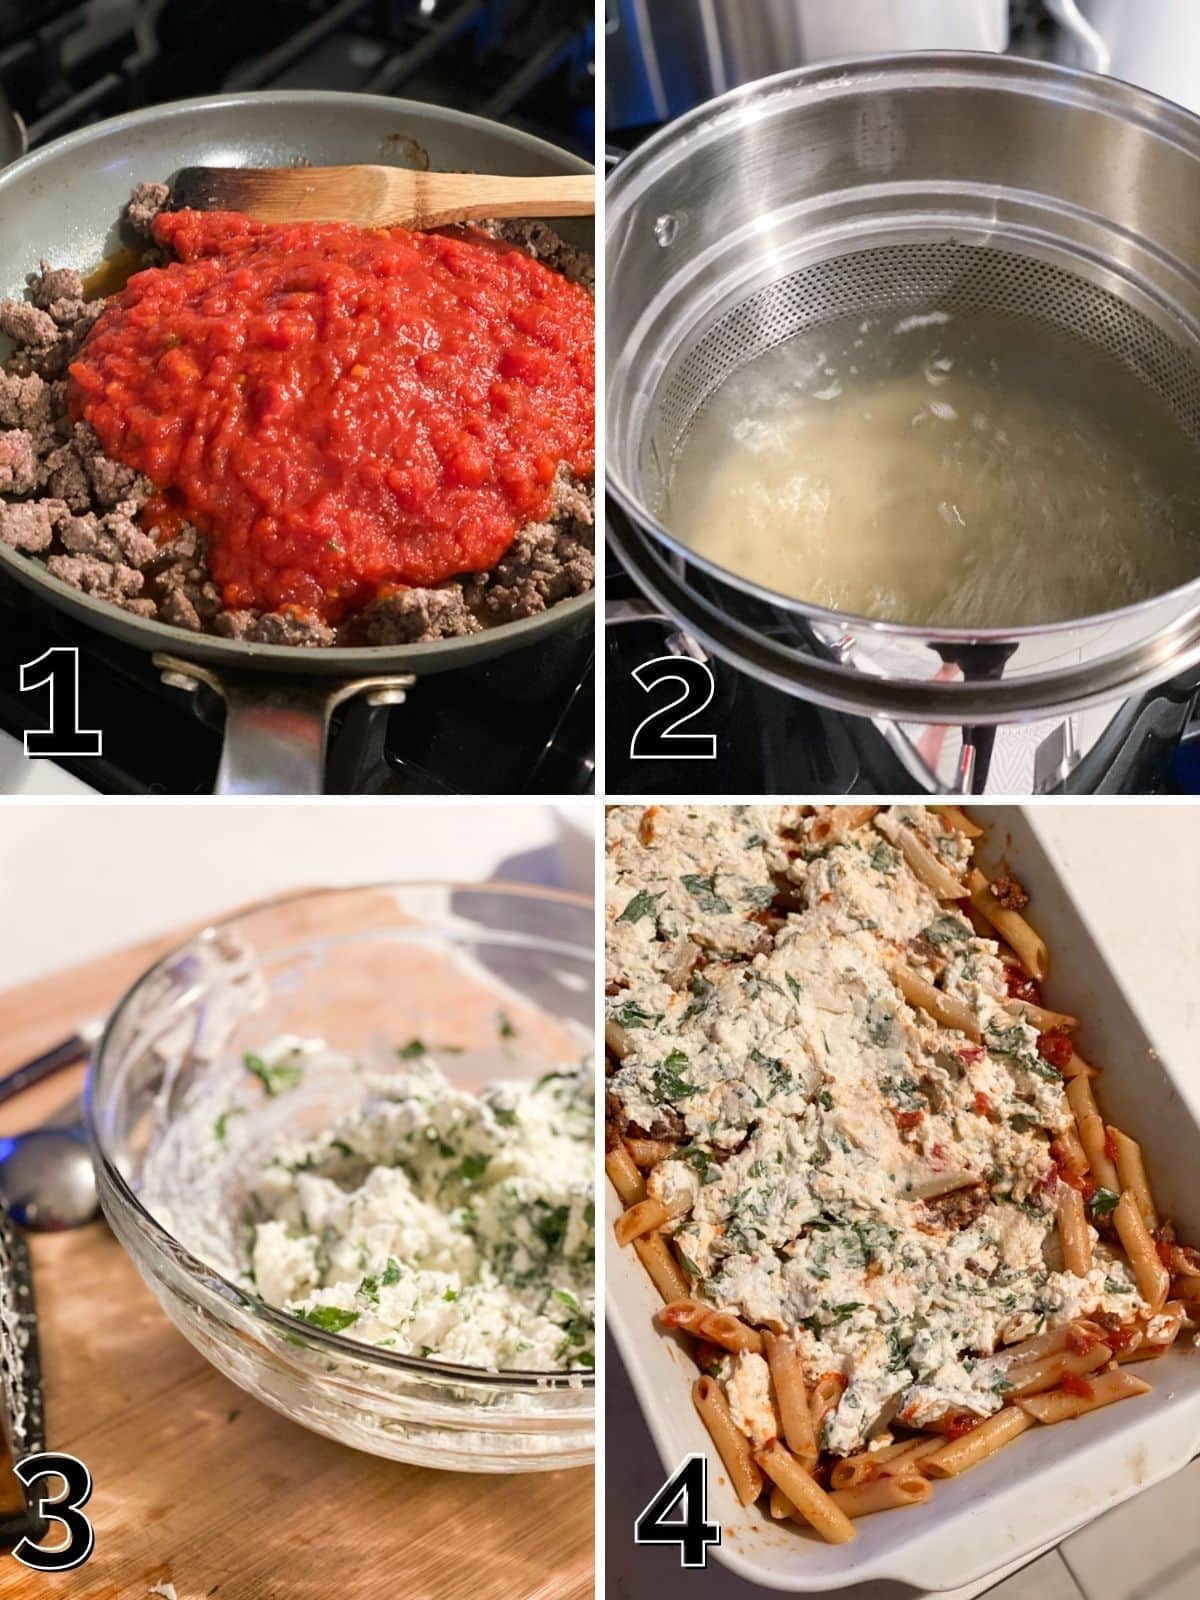 Step by step process for building a lazy lasagna bake. 